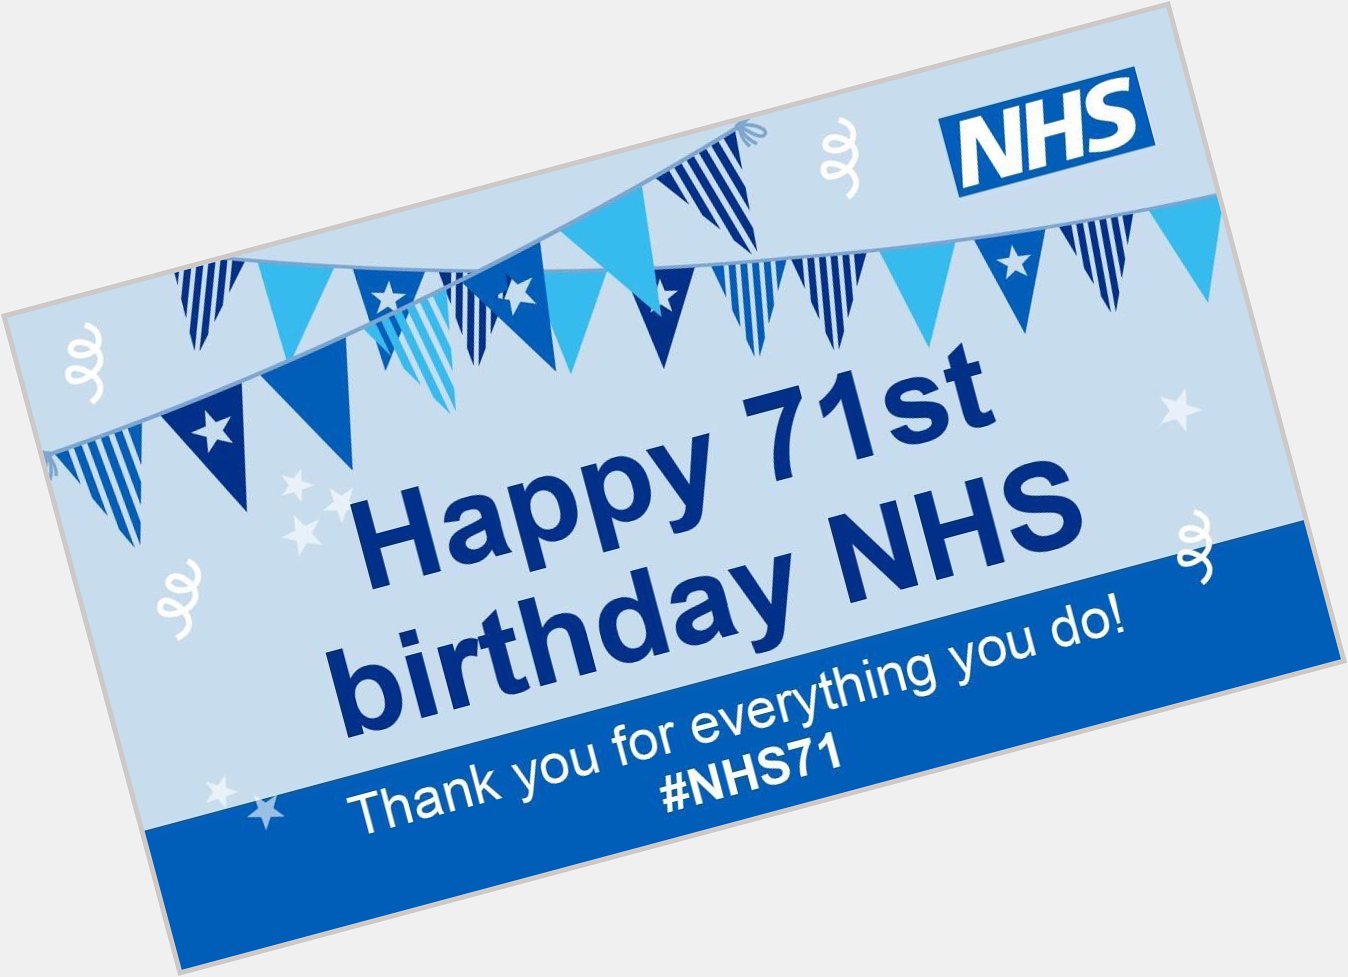 Happy Birthday NHS! Will you see 72 with either Jeremy Hunt or Boris Johnson as our prime minister! 